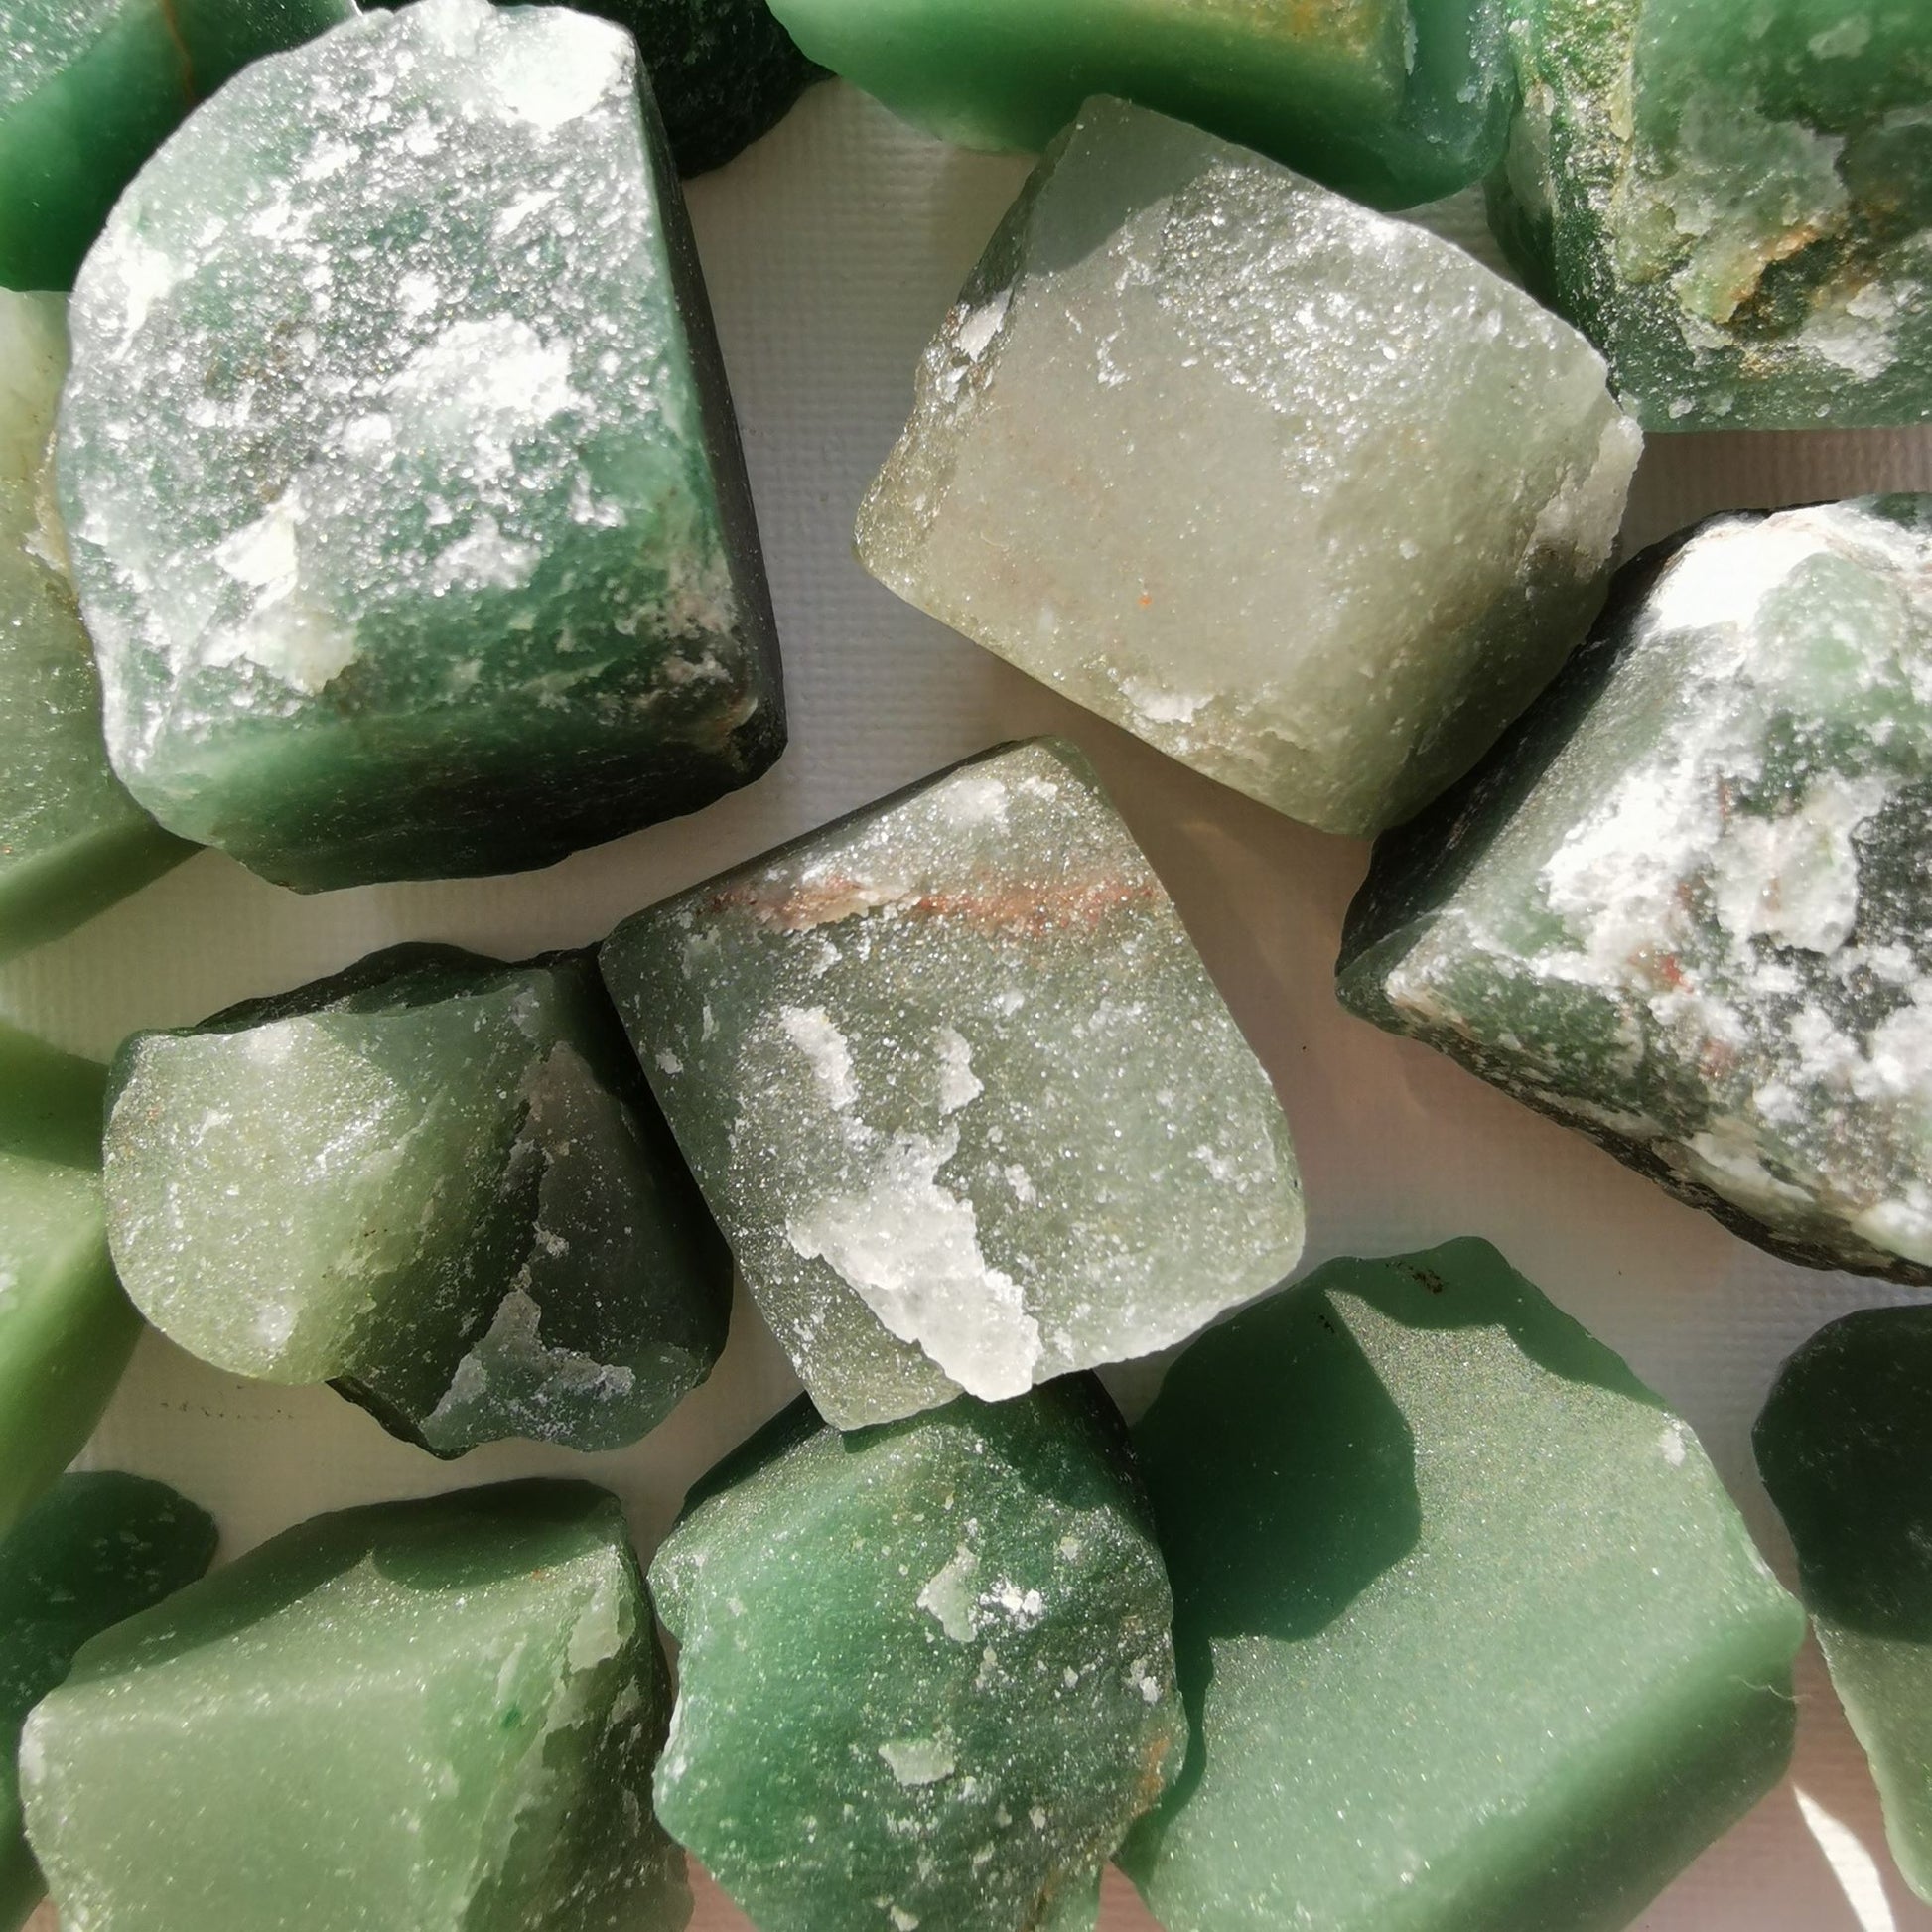 Dumi's Crystals | Rough Green Aventurine Crystals (Opportunity & Harmony) | A collection of Rough Green Aventurine Crystals, reminders of your potential for abundance. Green Aventurine fosters opportunity, reduces negativity & promotes inner peace. Scatter them in your home or workspace to attract success, cultivate harmony & welcome positive change. Embrace the power of Rough Green Aventurine from Dumi's Crystals!